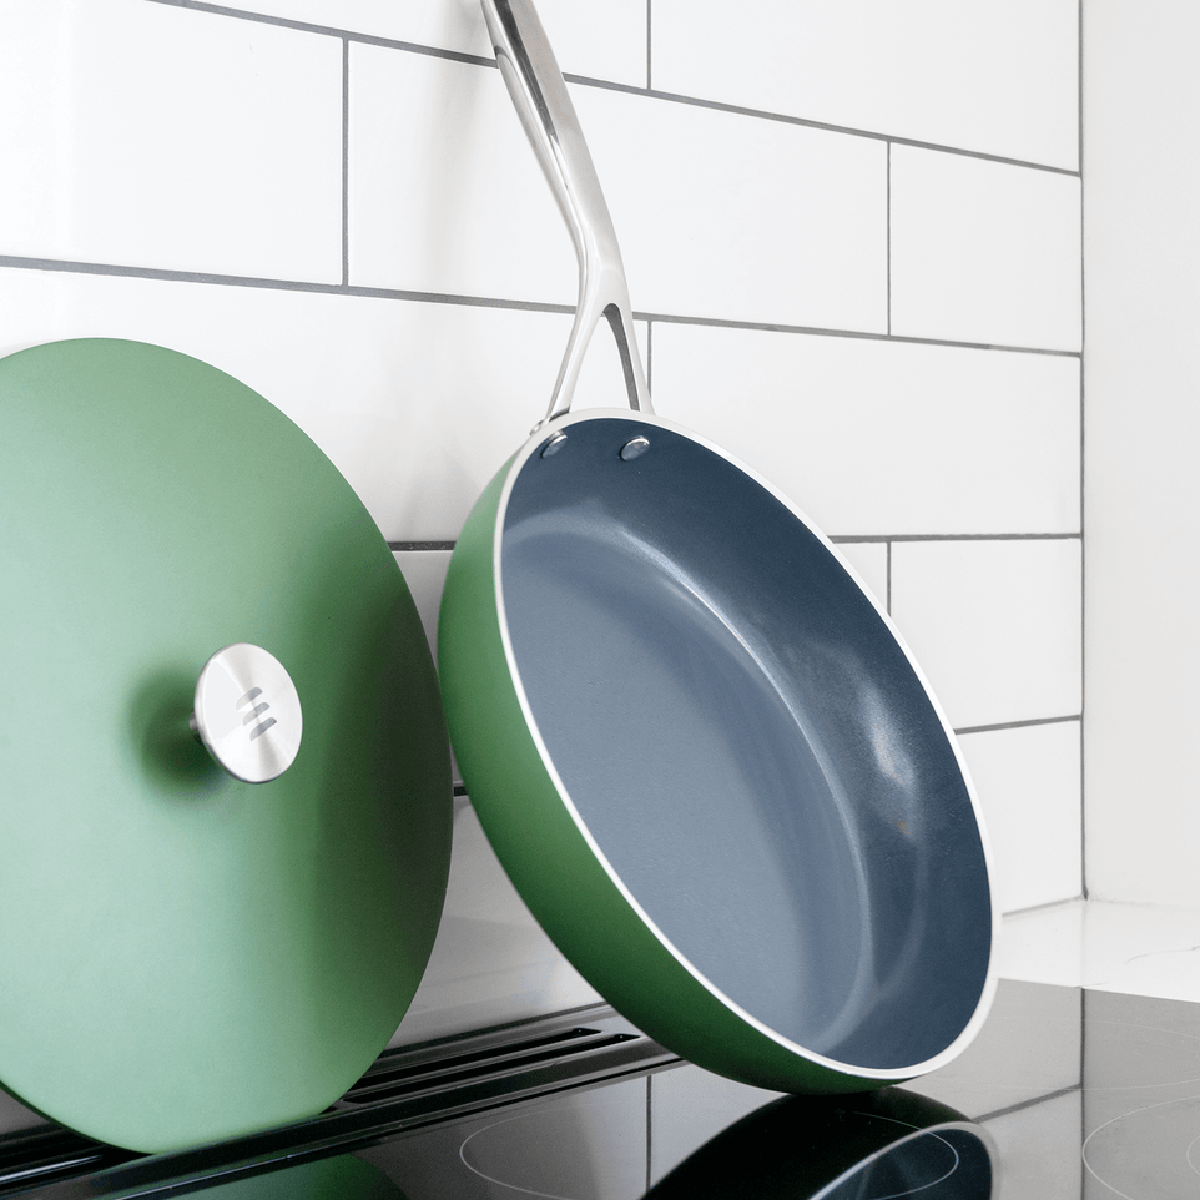 My Fave Pots and Pans - That Actually Look Cute too 